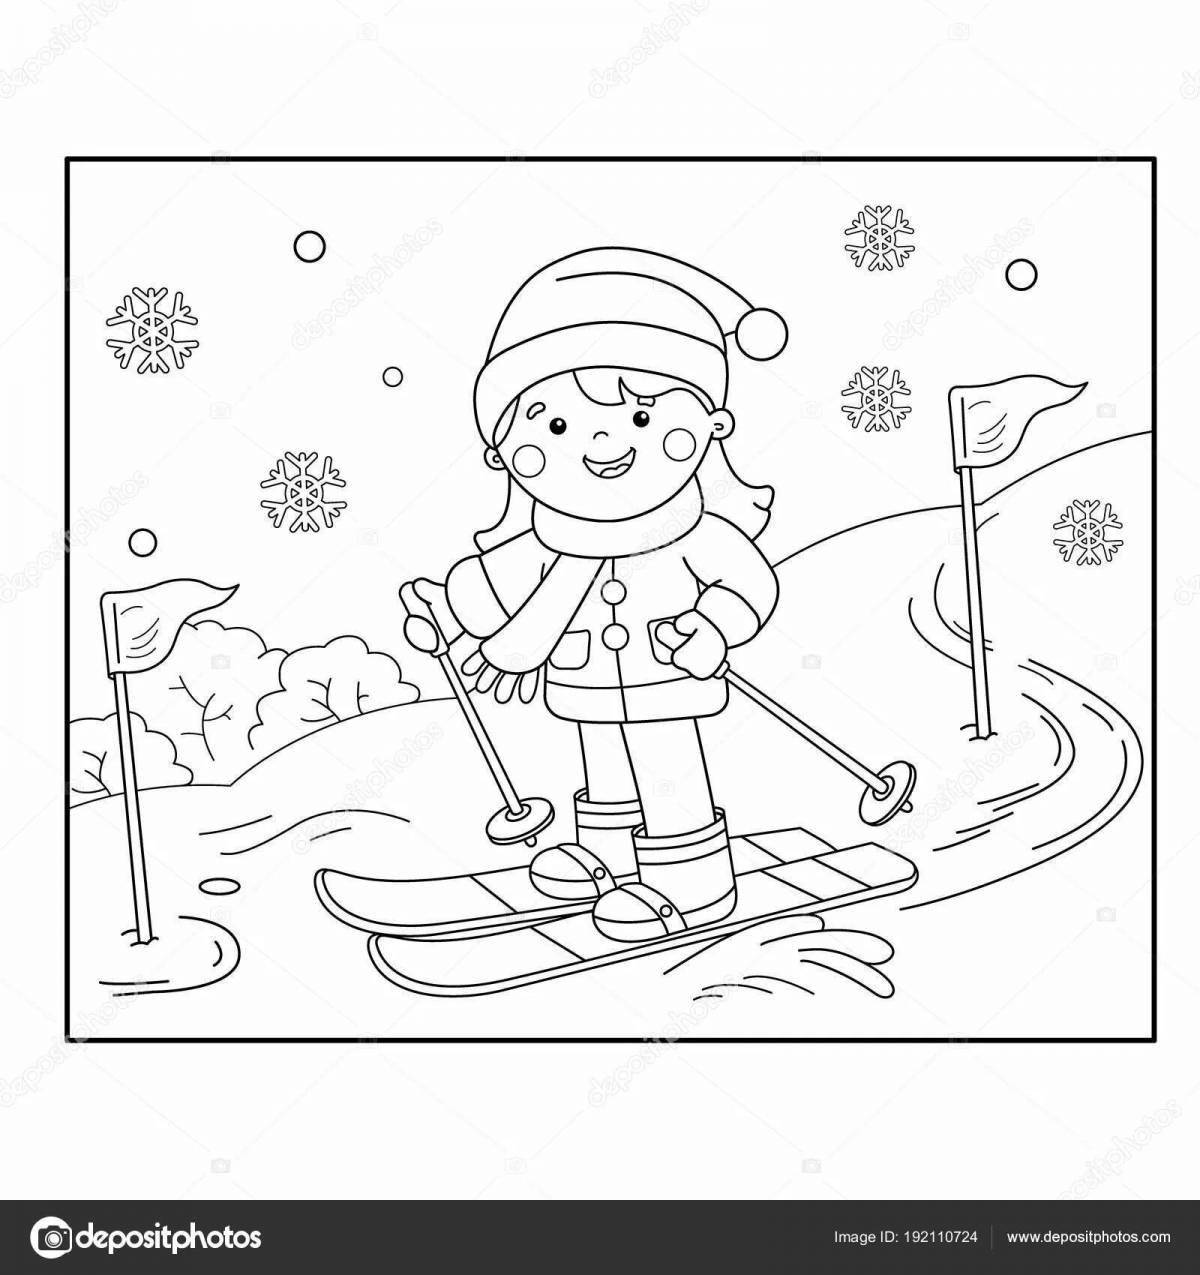 Snowy winter sports coloring page